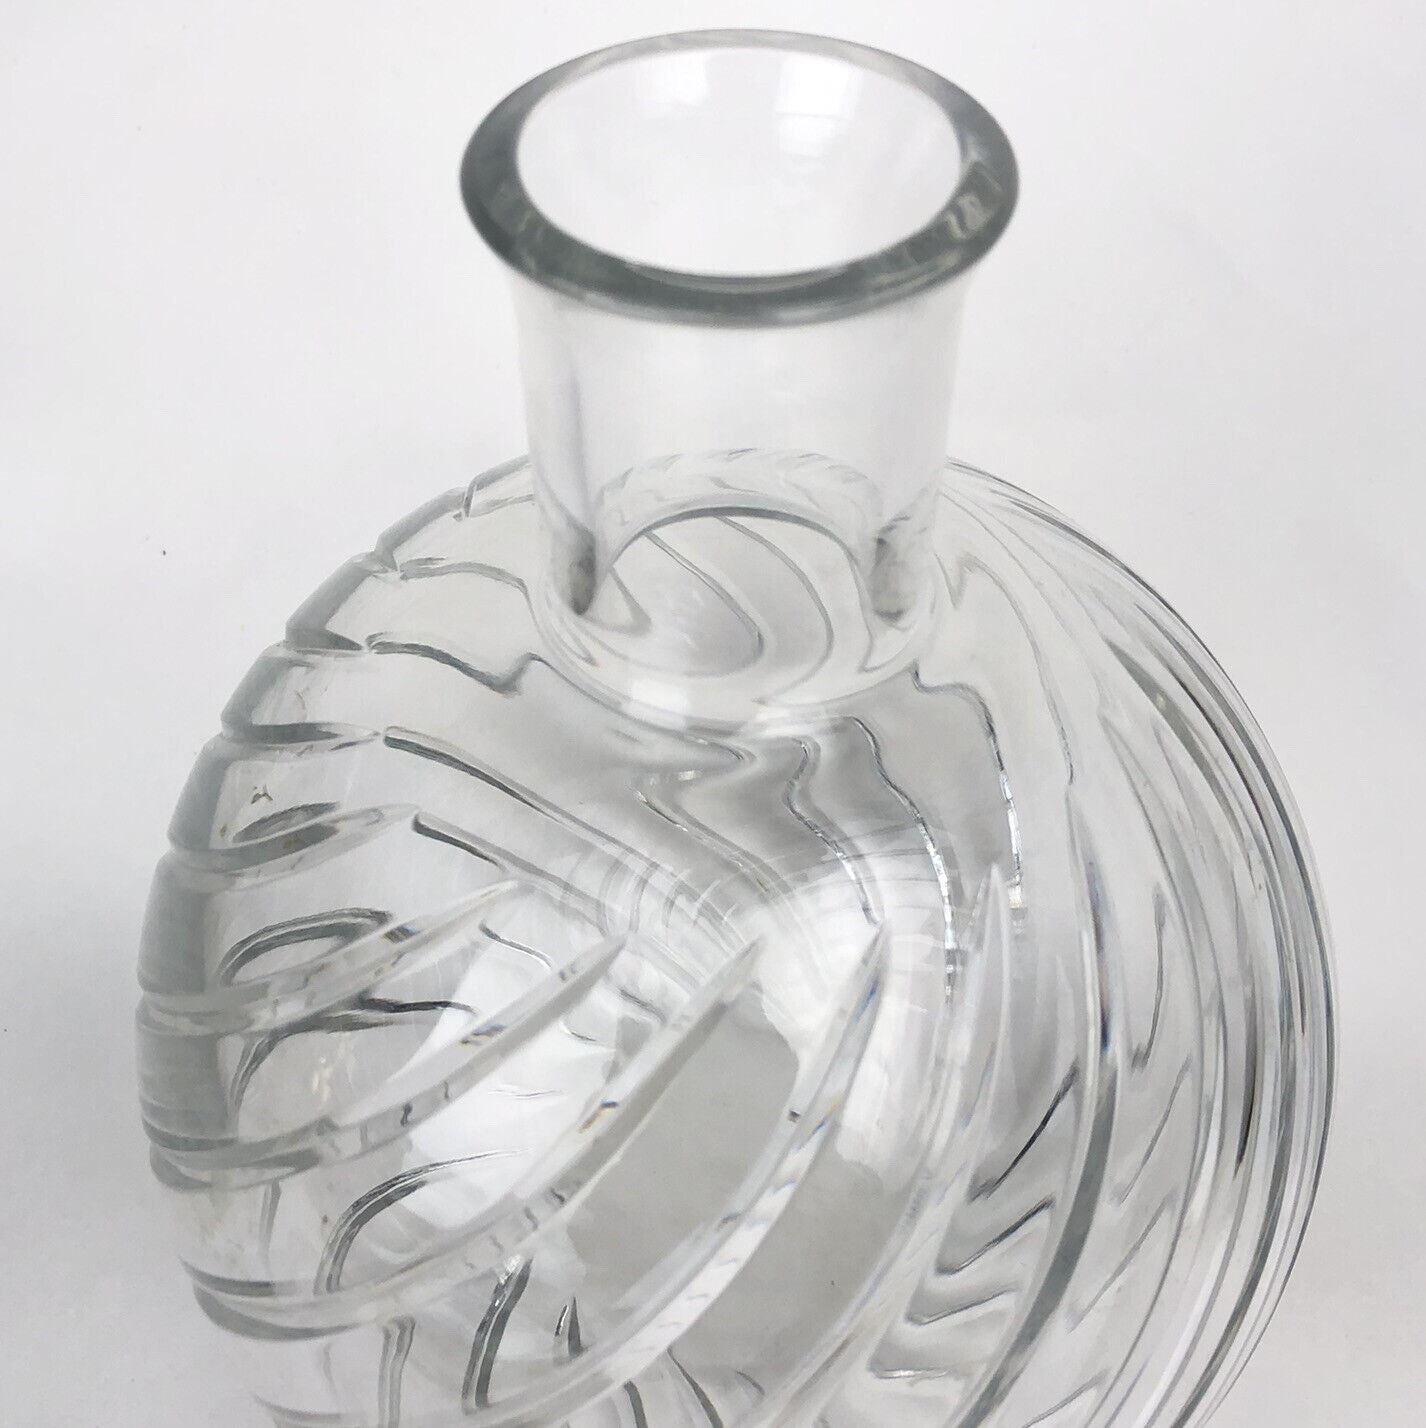 Baccarat France Crystal Cyclades Swirl 7 1/2” Vase Decanter Water Pitcher Signed